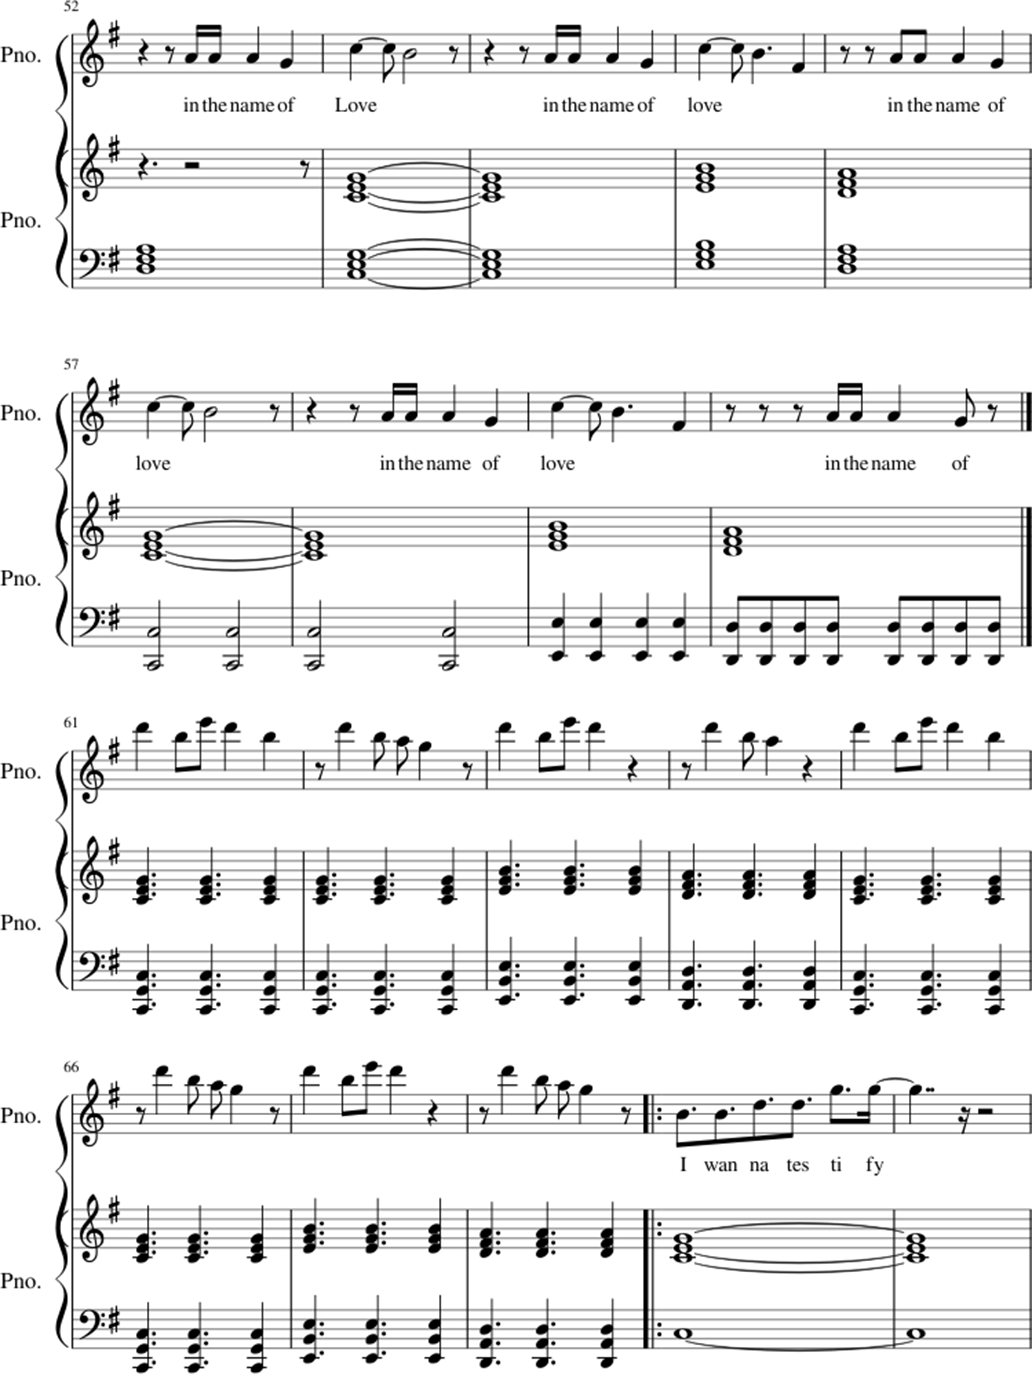 In the name of love sheet music notes 5